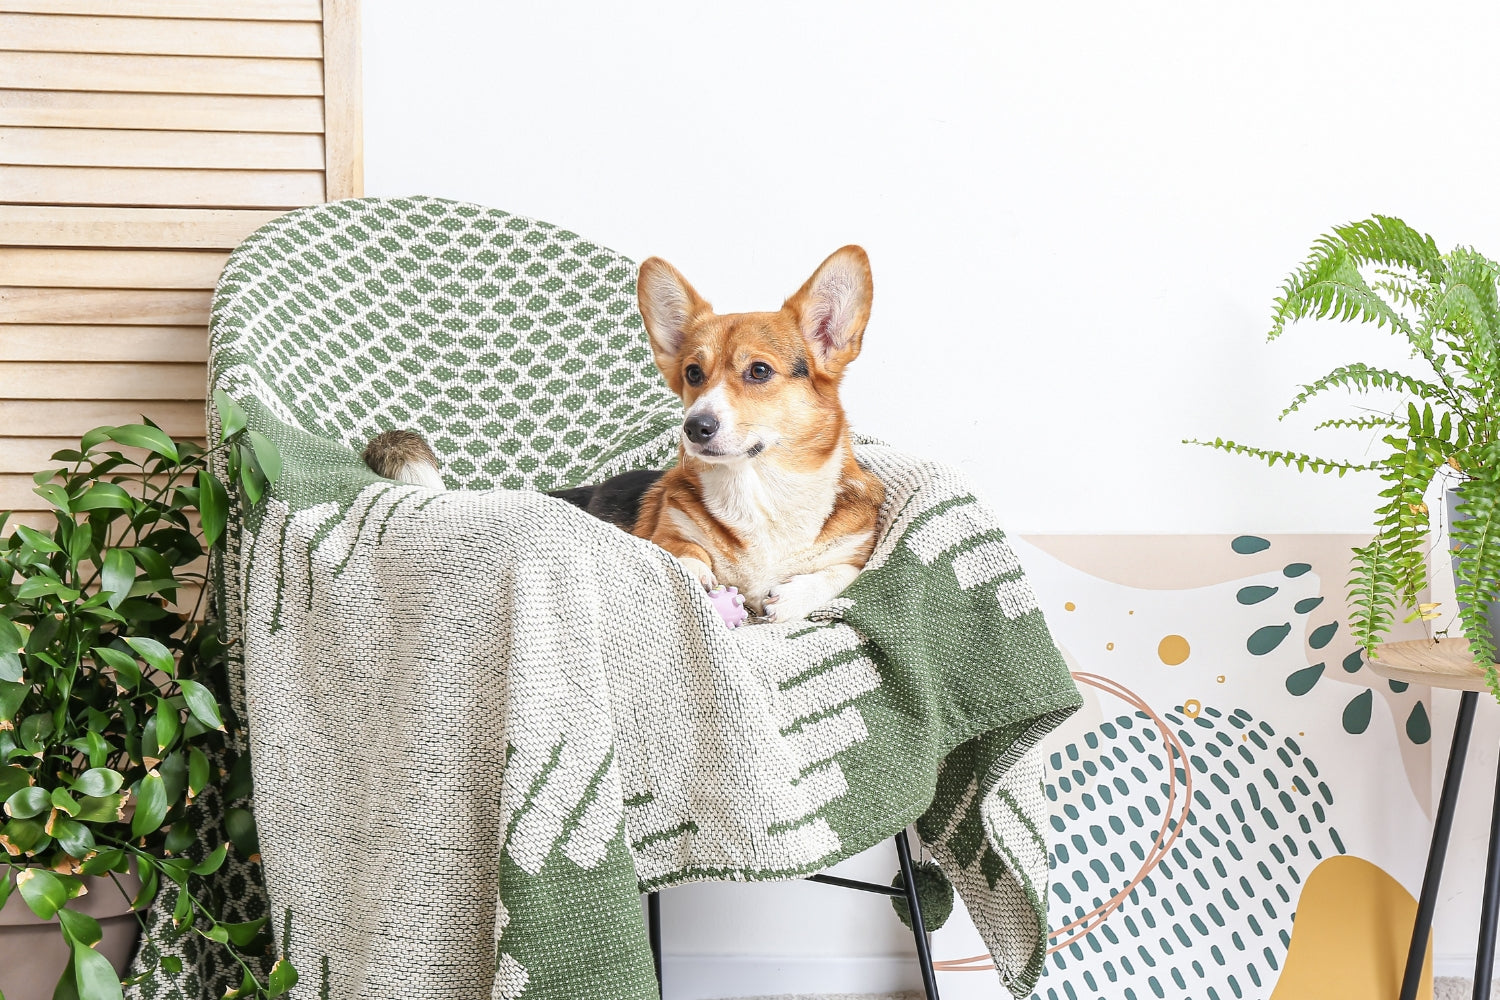 5 Tips to Have a More Eco-Friendly Dog